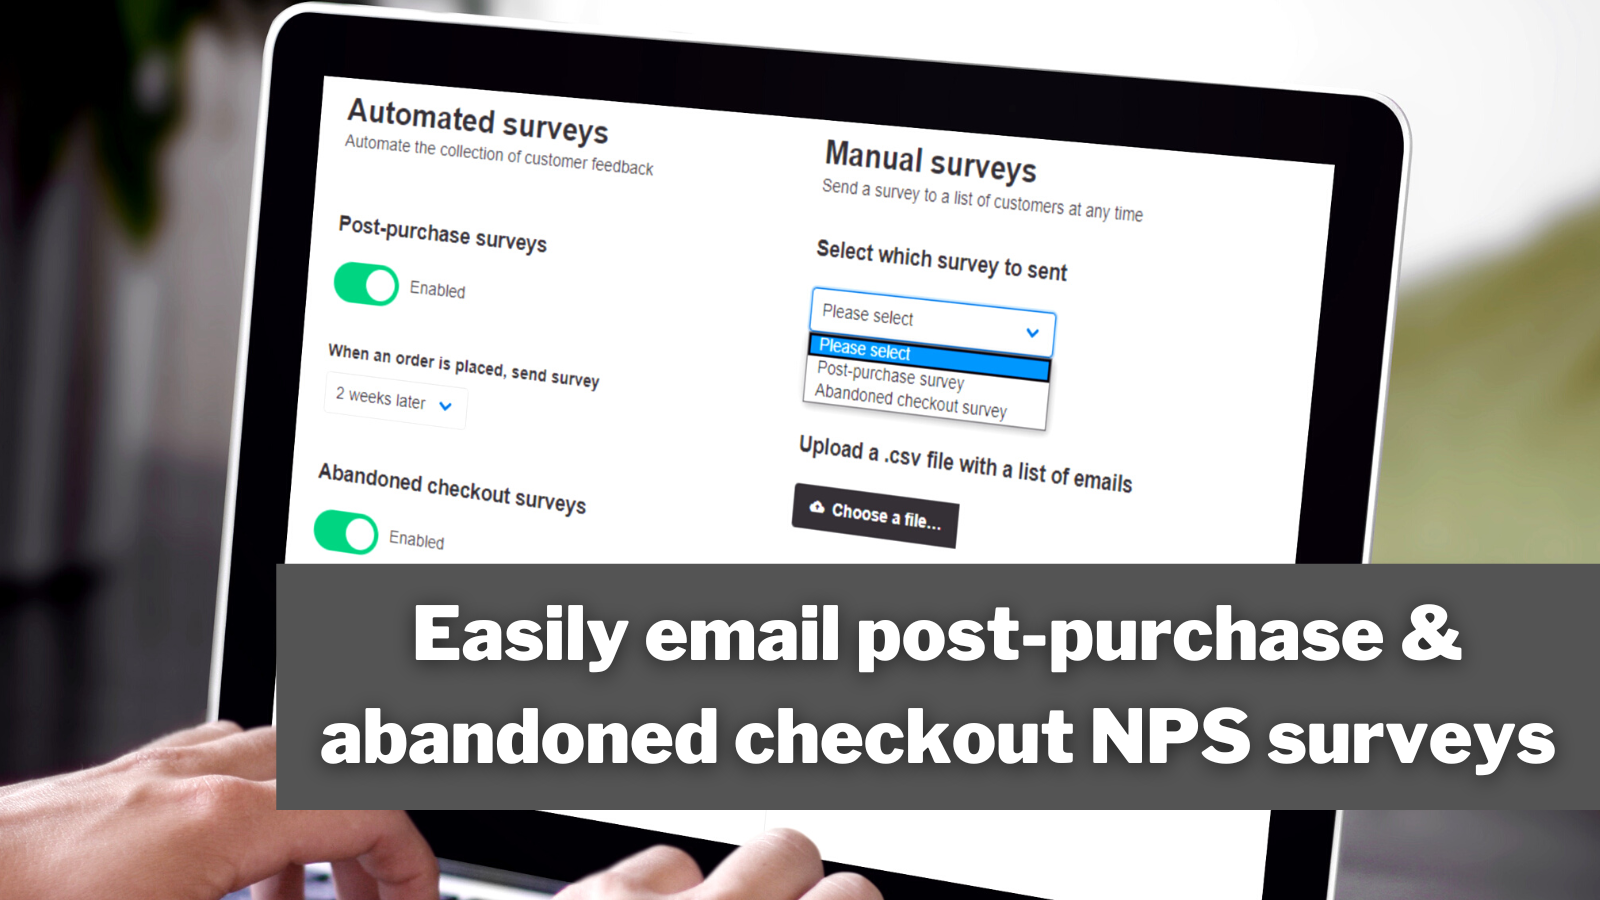 Send NPS surveys for every purchase or abandoned cart